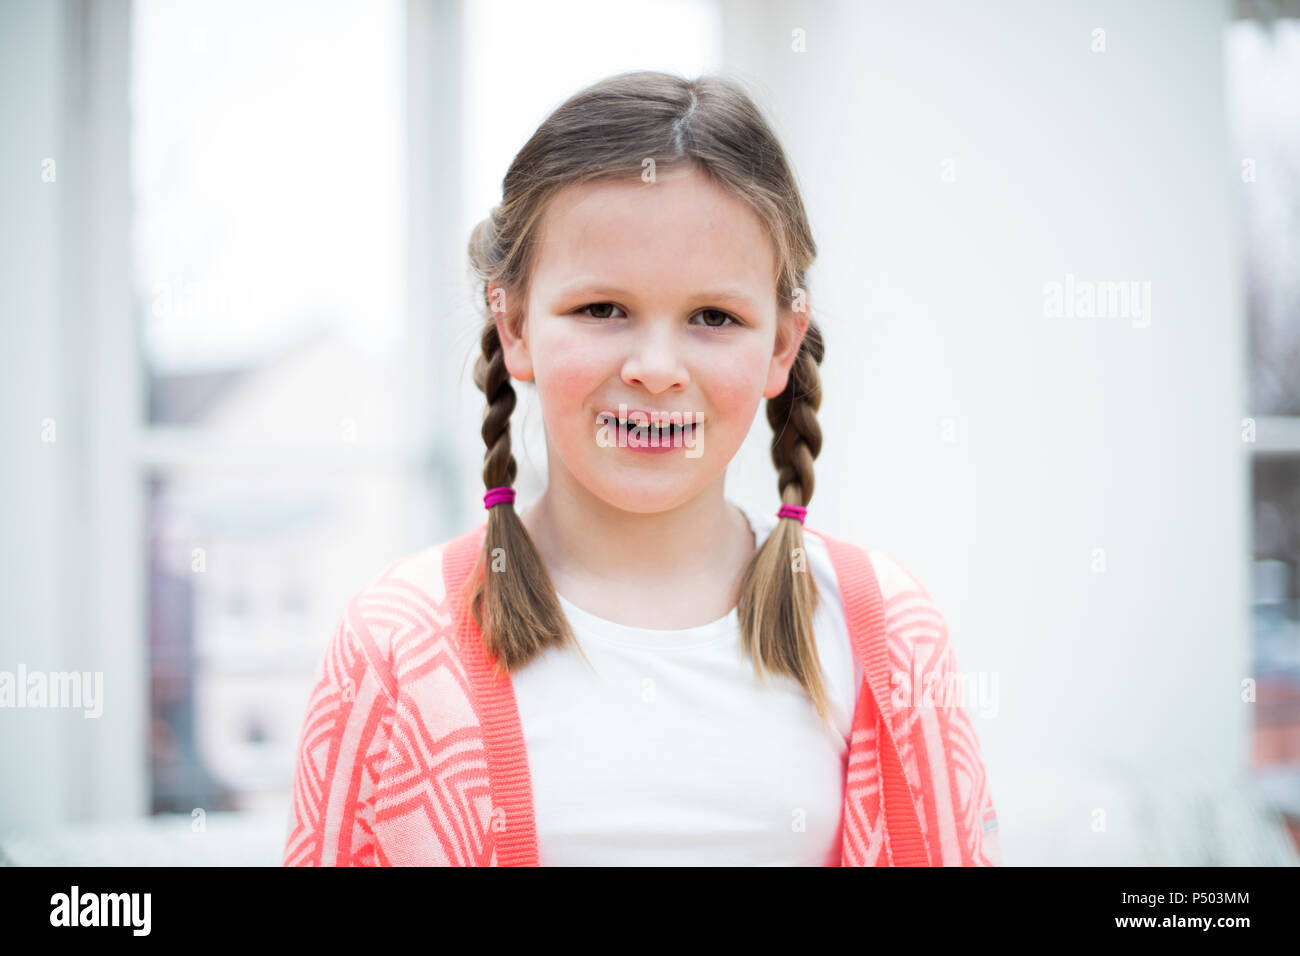 Portrait of smiling girl with braids Stock Photo